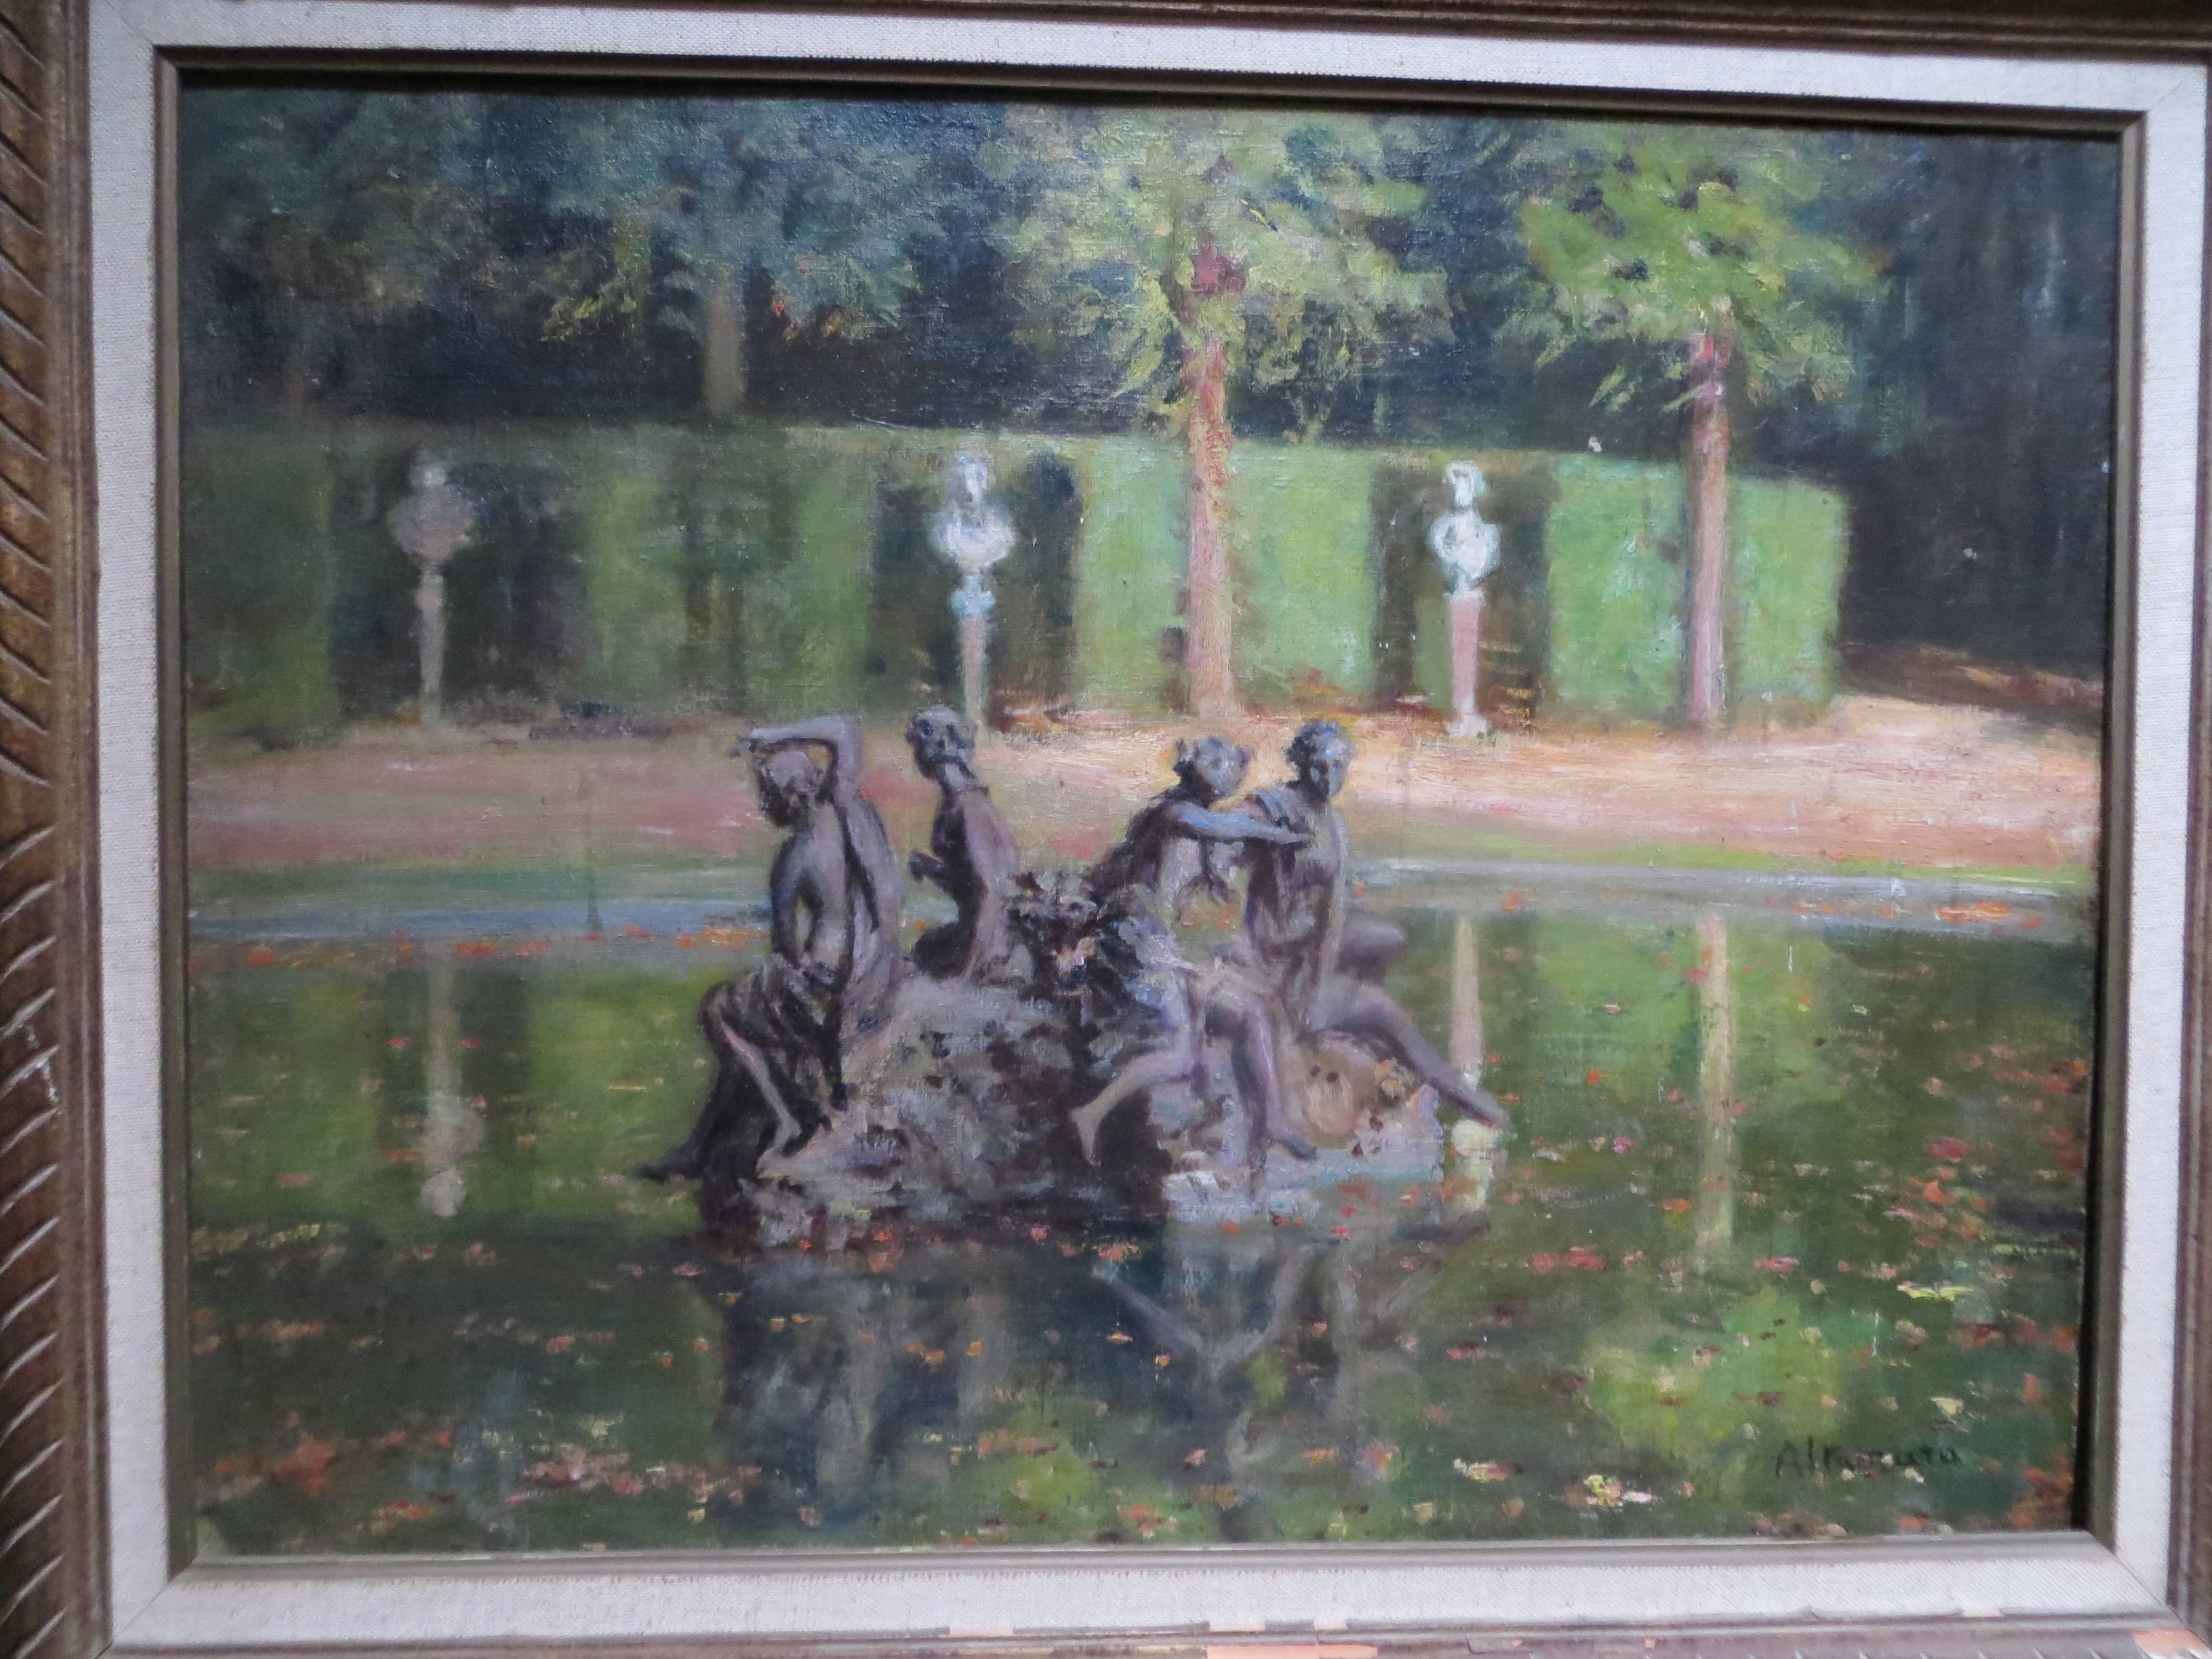 The Basin of the Four Nymphs at Grand Trianon - Impressionist Painting by Alessandro Altamura